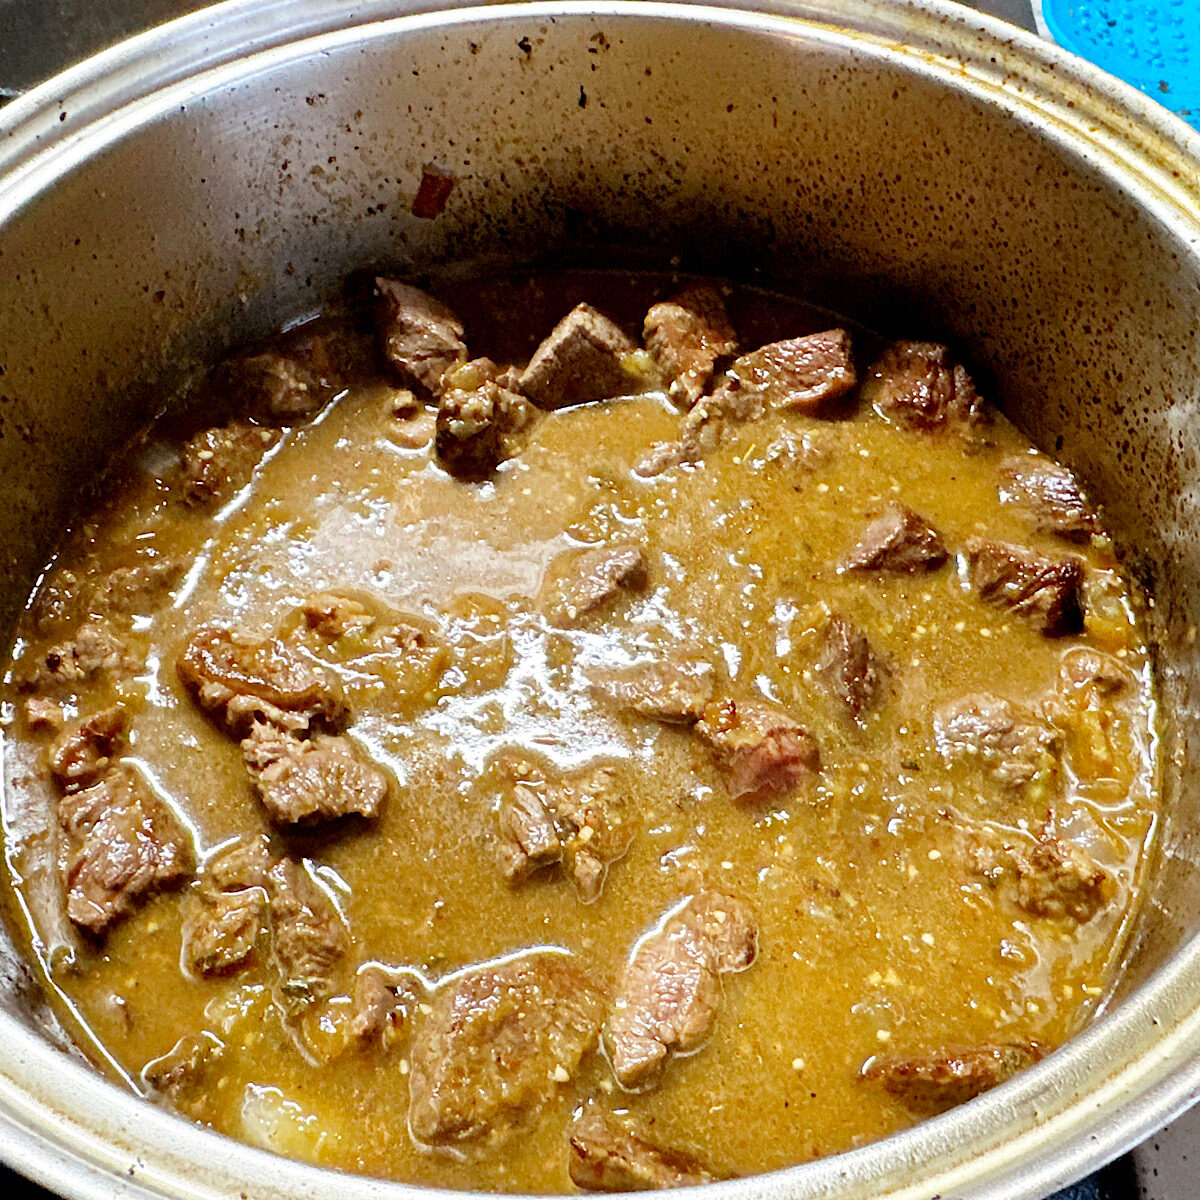 Pork chile verde cooking in a large stainless steel pot on the stove.